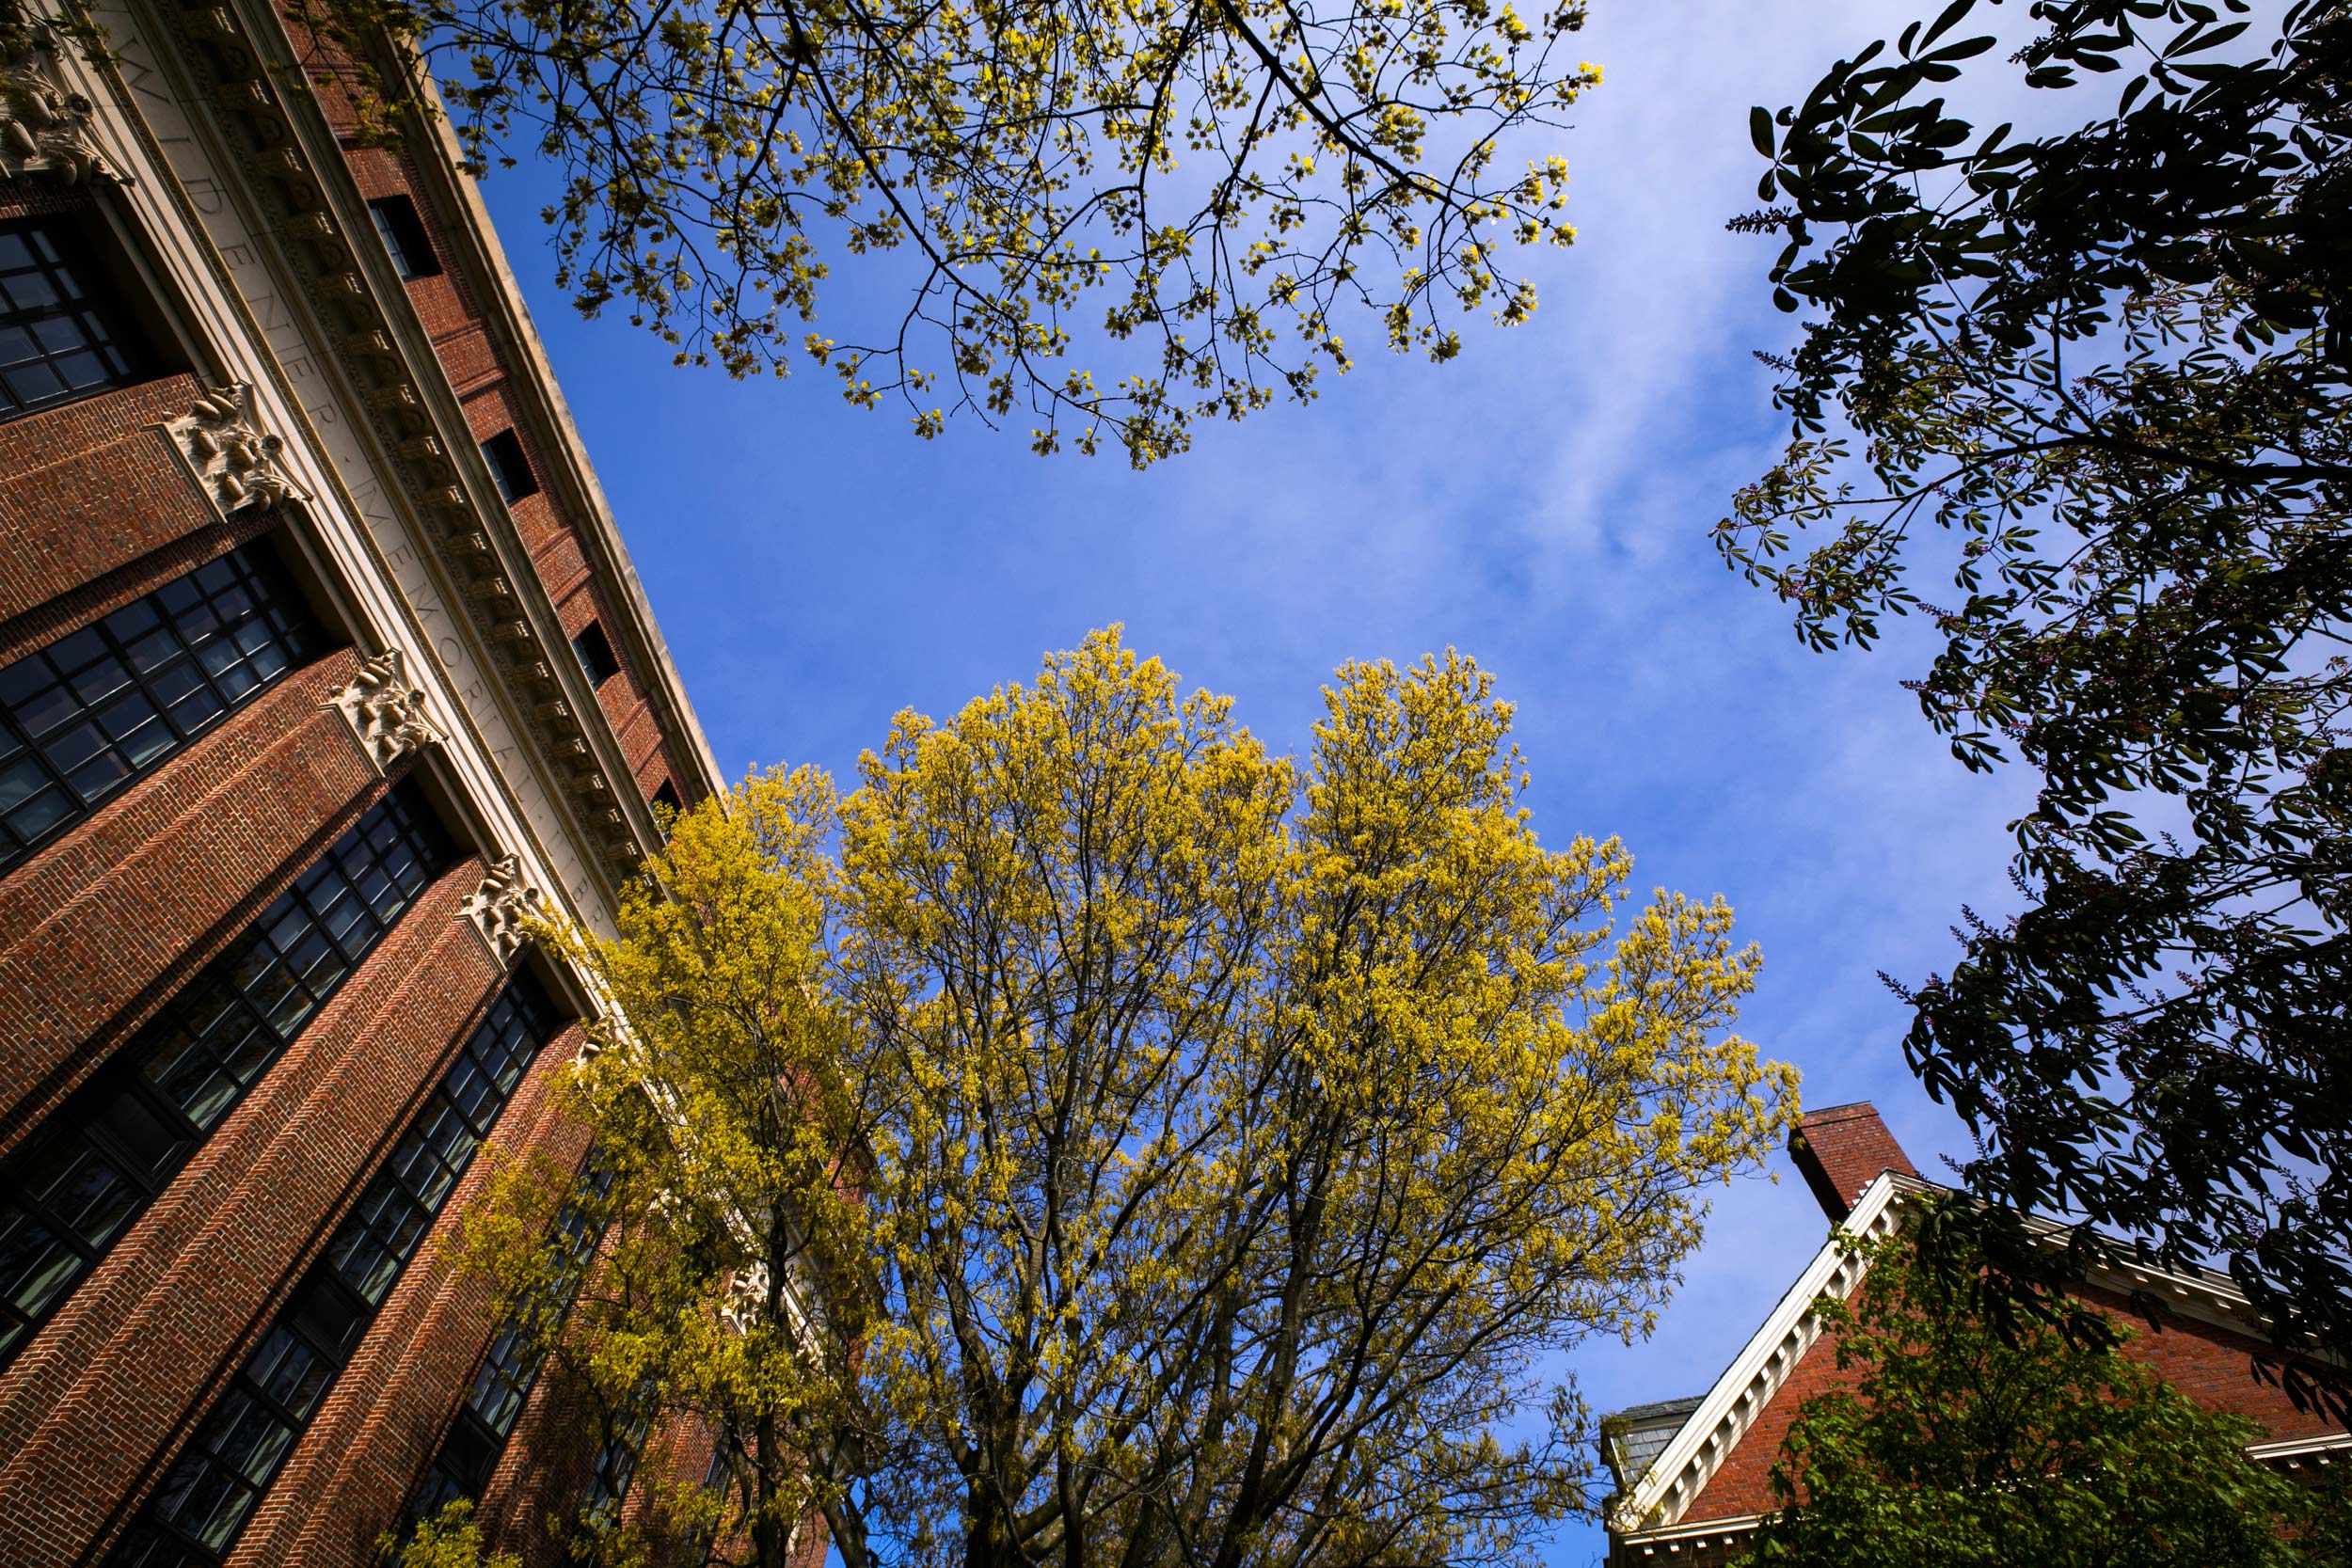 Spring brings budding leaves between Widener Library and Wigglesworth Hall.